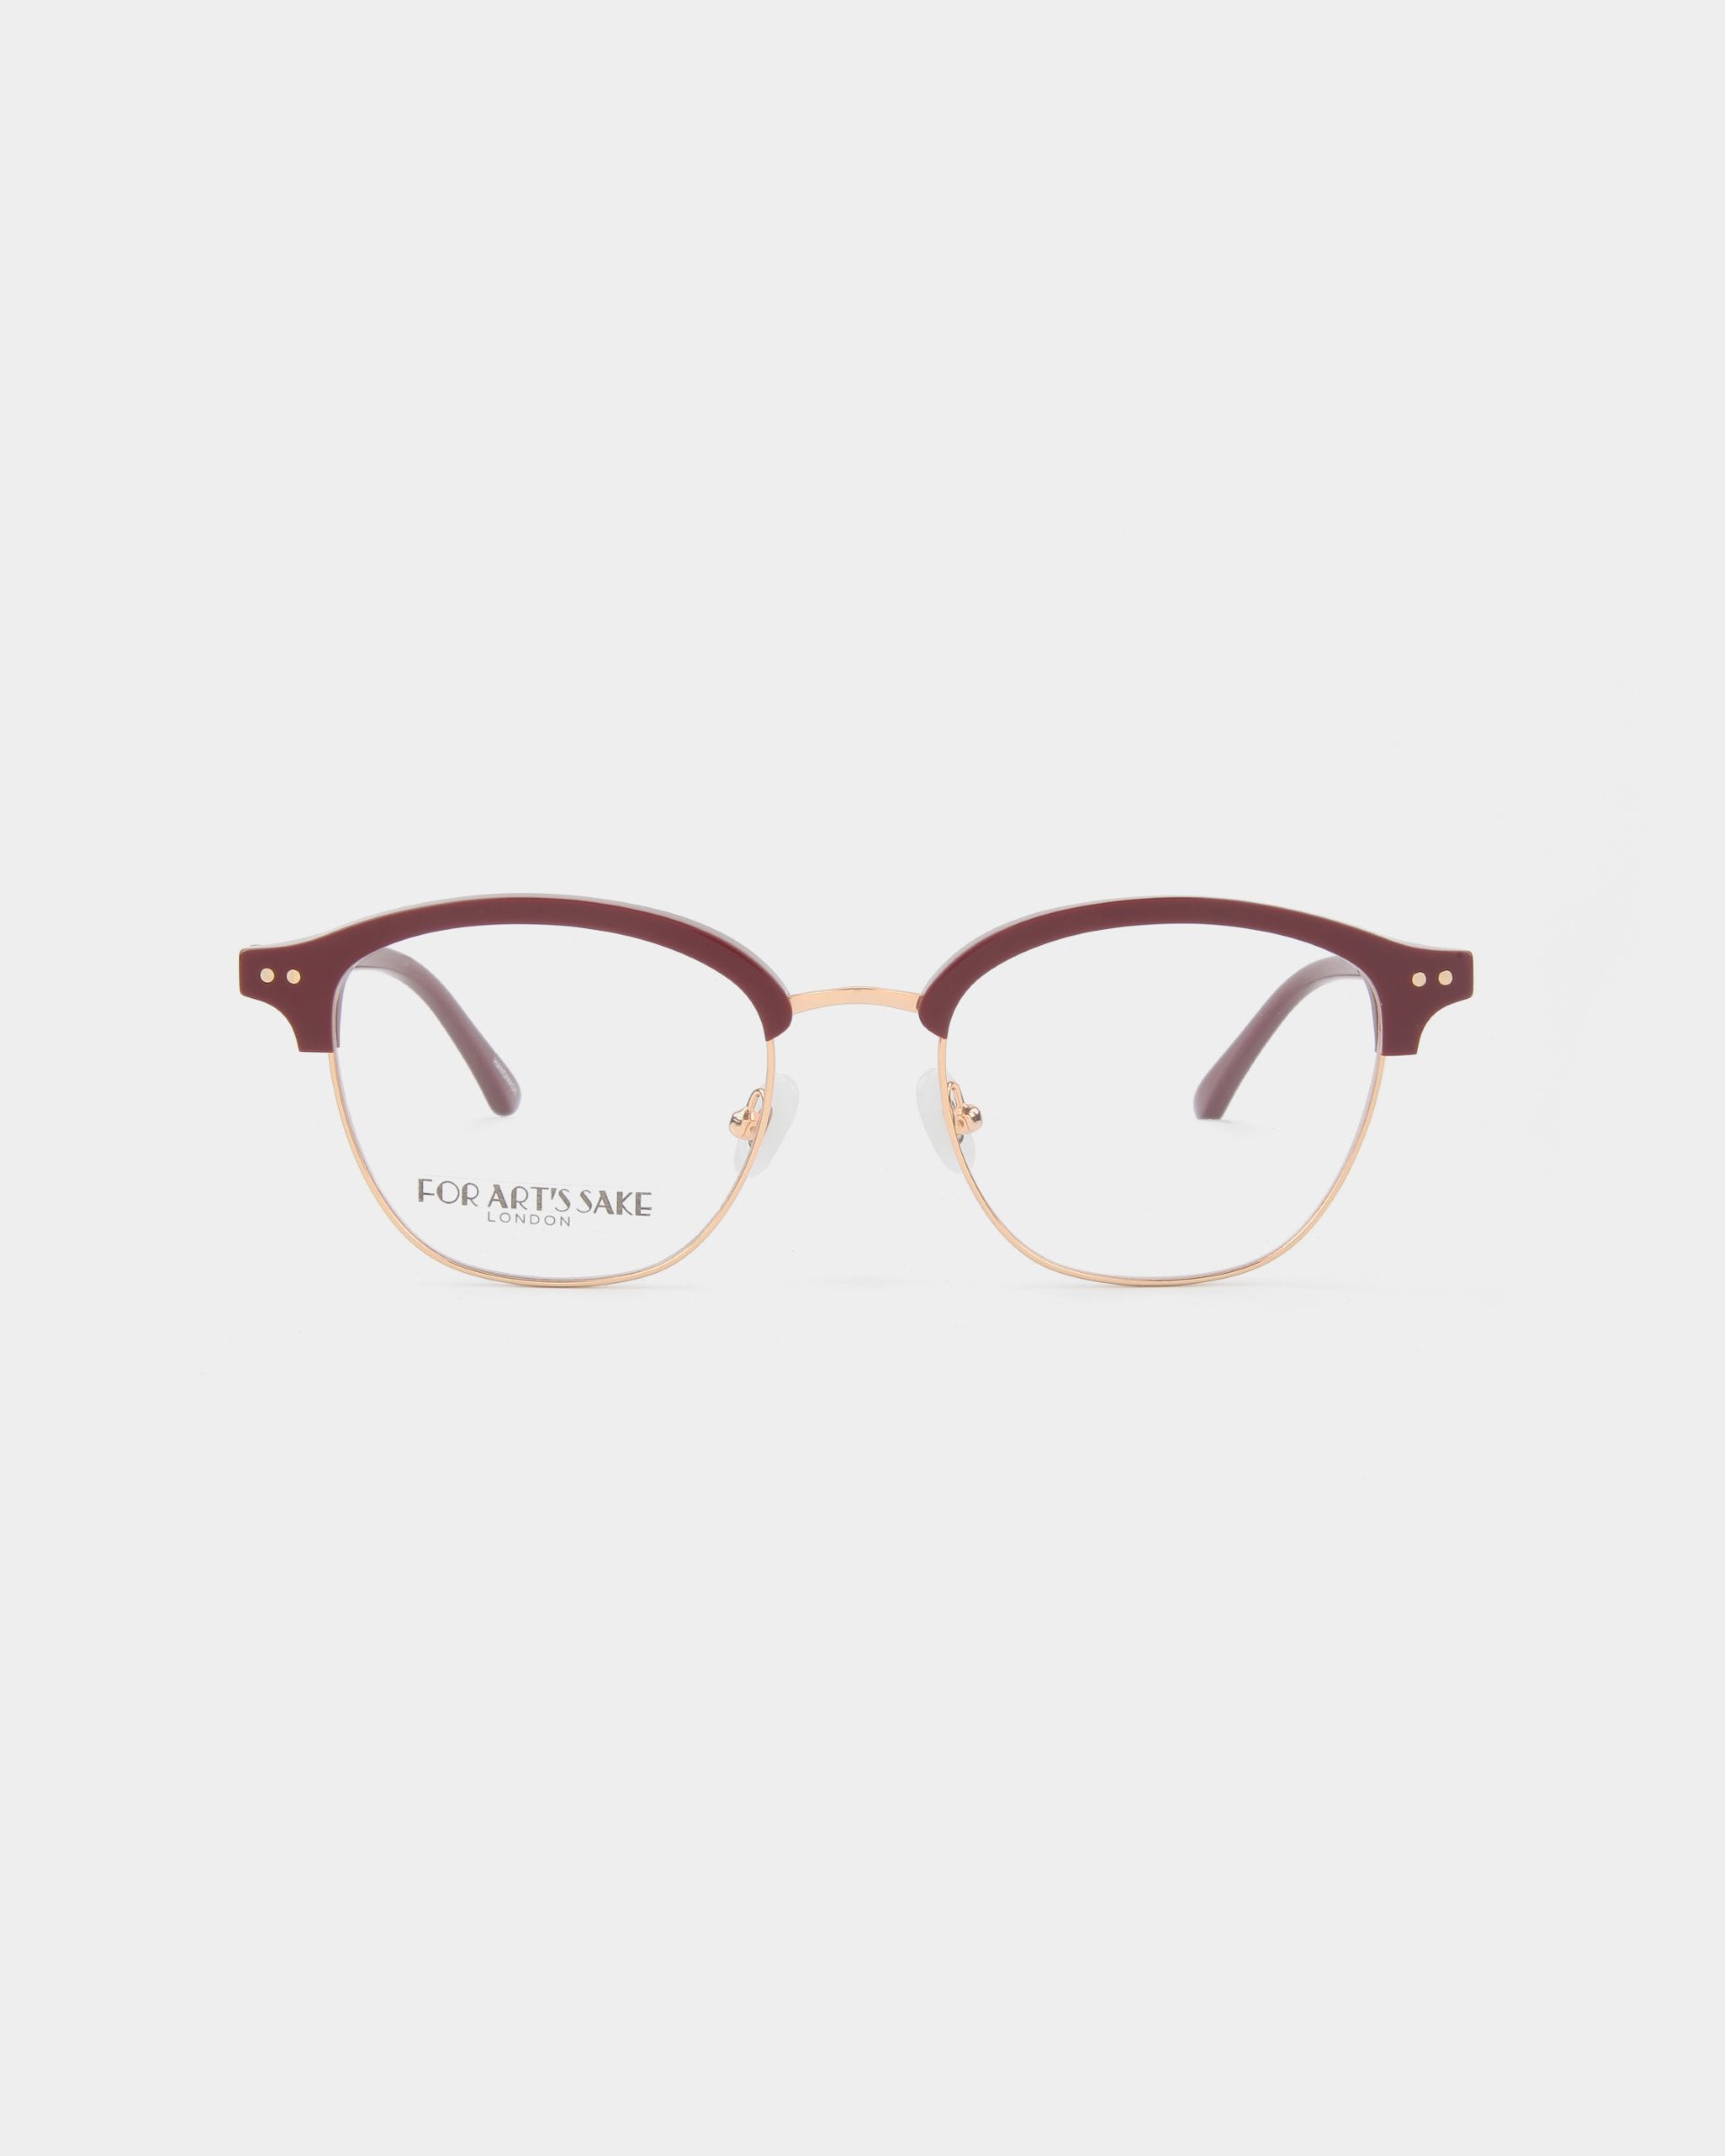 A pair of stylish eyeglasses with burgundy half-rim frames and gold accents on the temples. The clear lenses, featuring a subtle brand logo "For Art's Sake®" on the left lens, include a blue light filter for added eye comfort. The plain white background highlights the Painkiller beautifully.